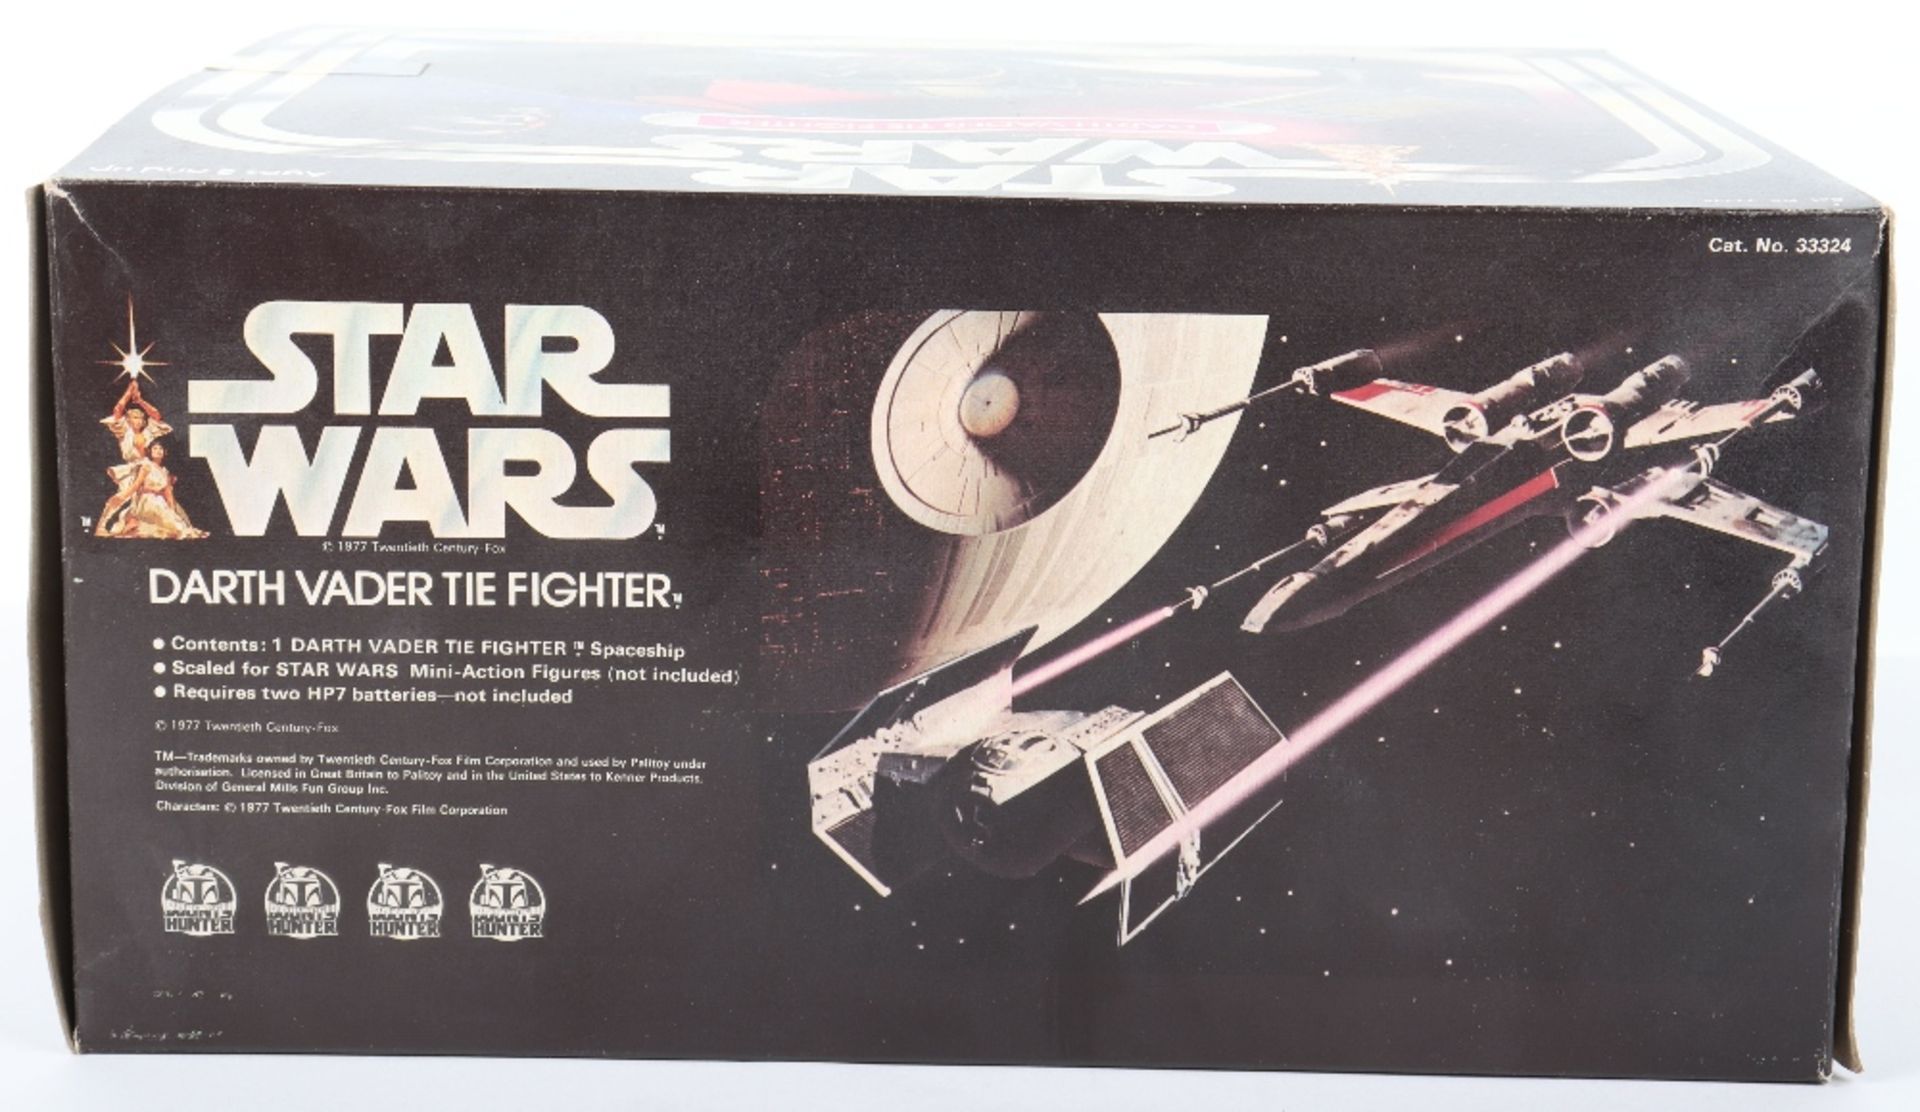 Boxed Palitoy Star Wars Darth Vader Tie Fighter - Image 7 of 11